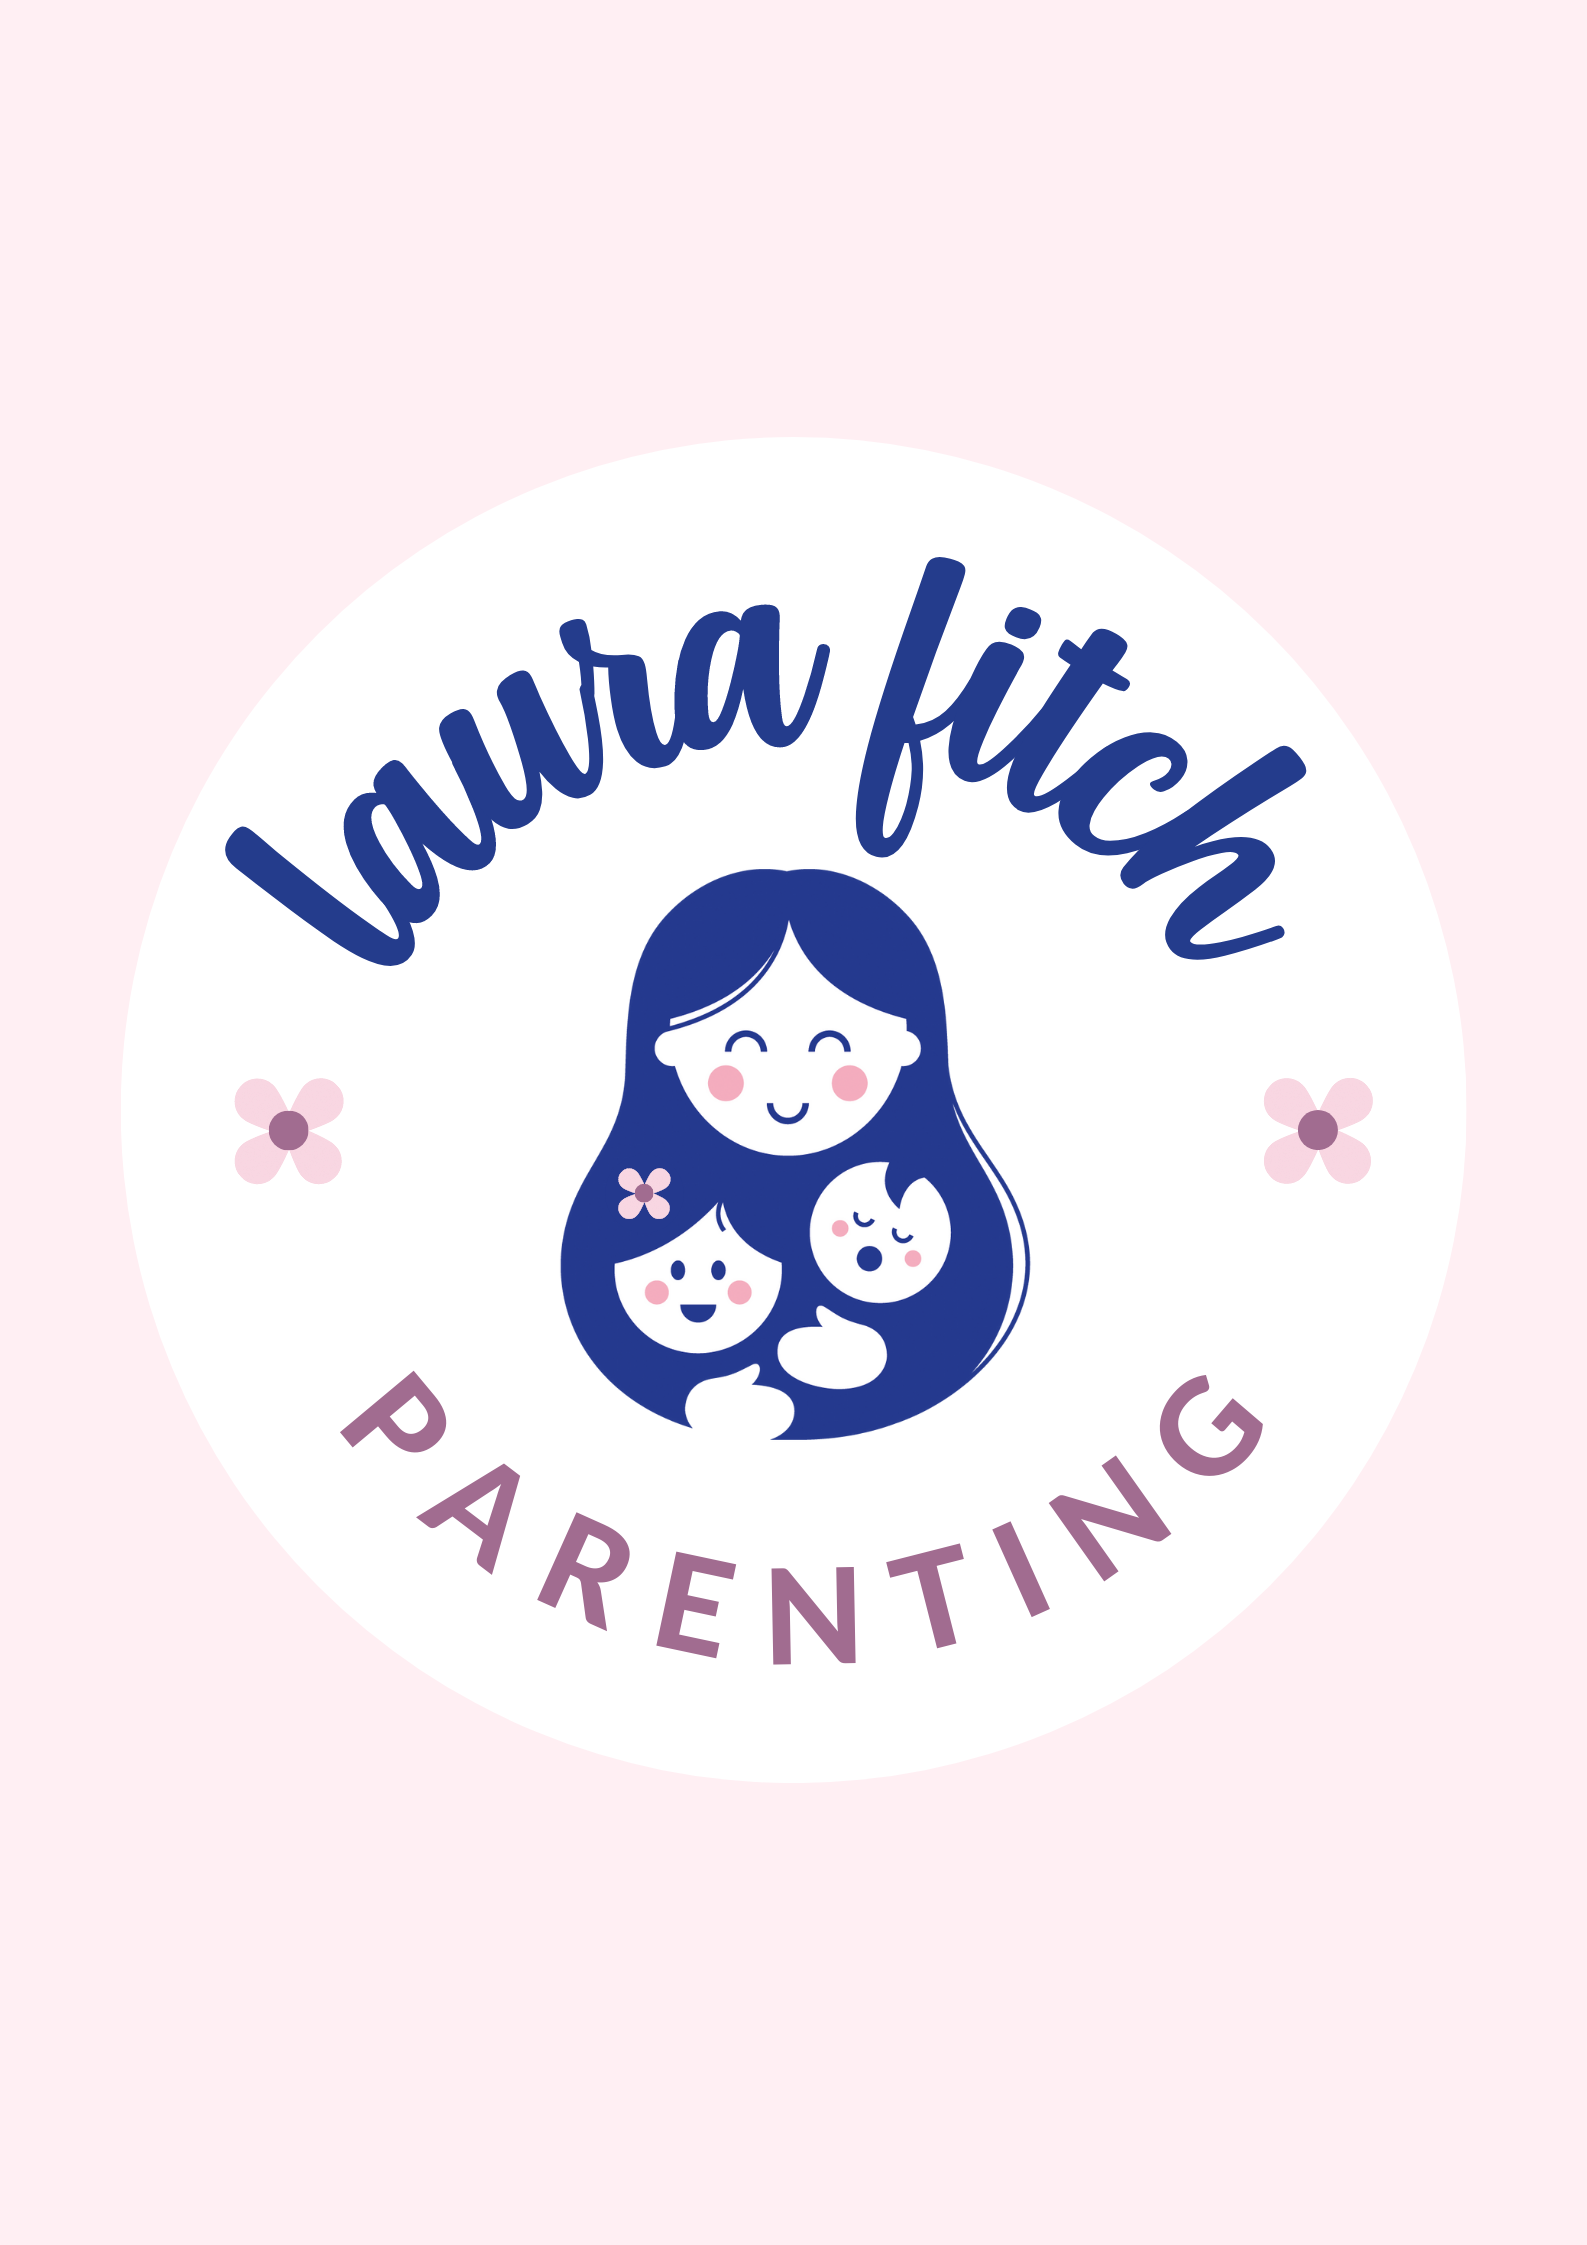 Laura Fitch Parenting's logo